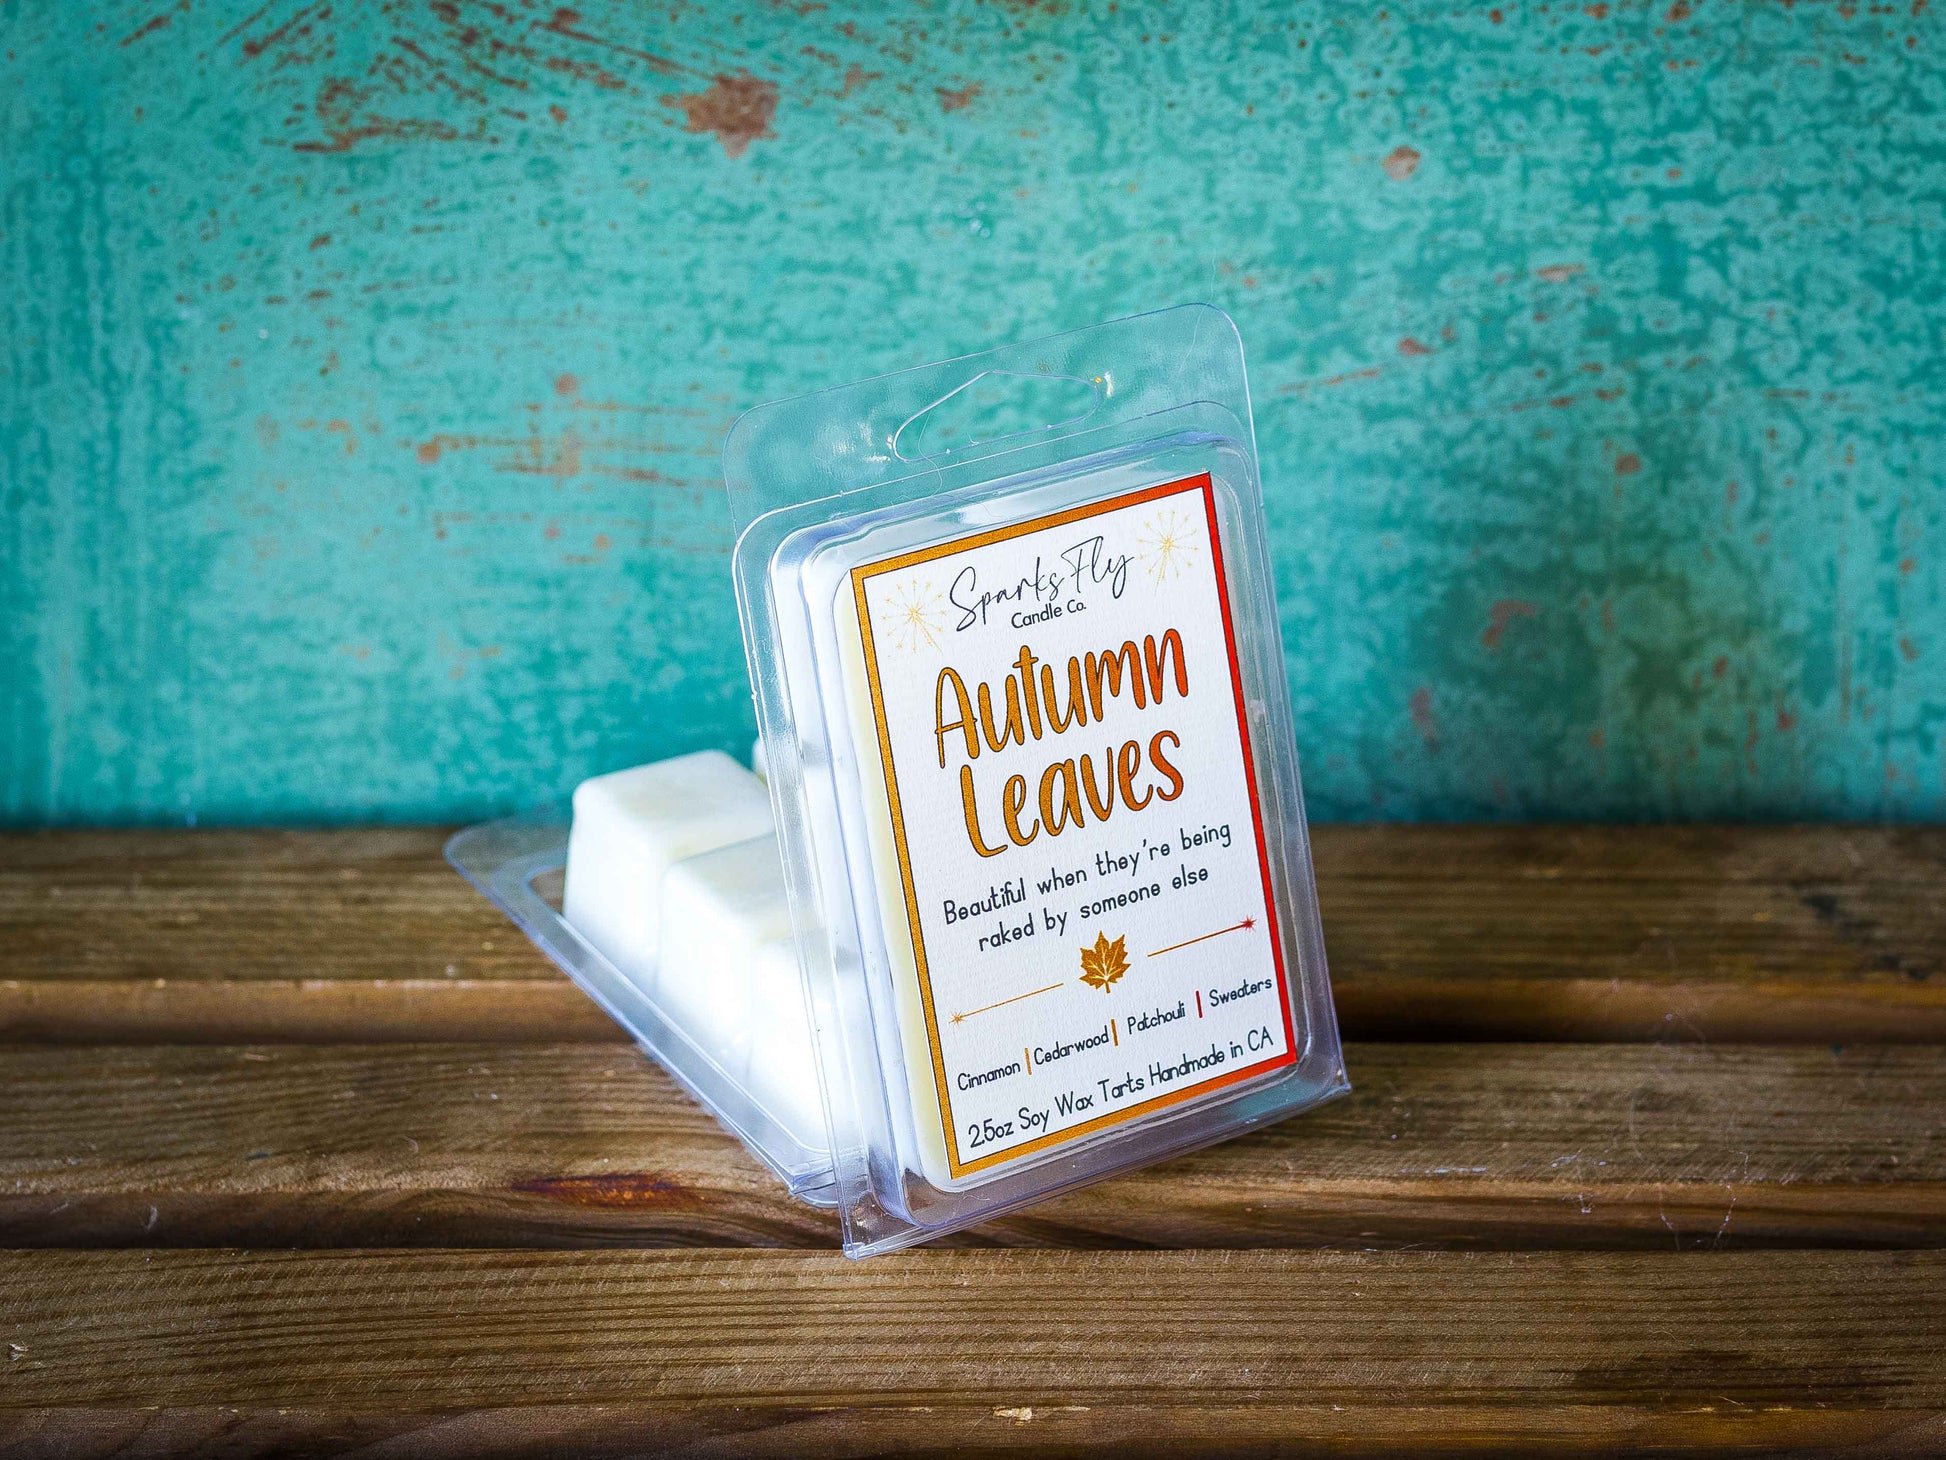 Autumn Leaves sassy candle; celebrates the beauty of fall foliage best enjoyed when raked by others, satire